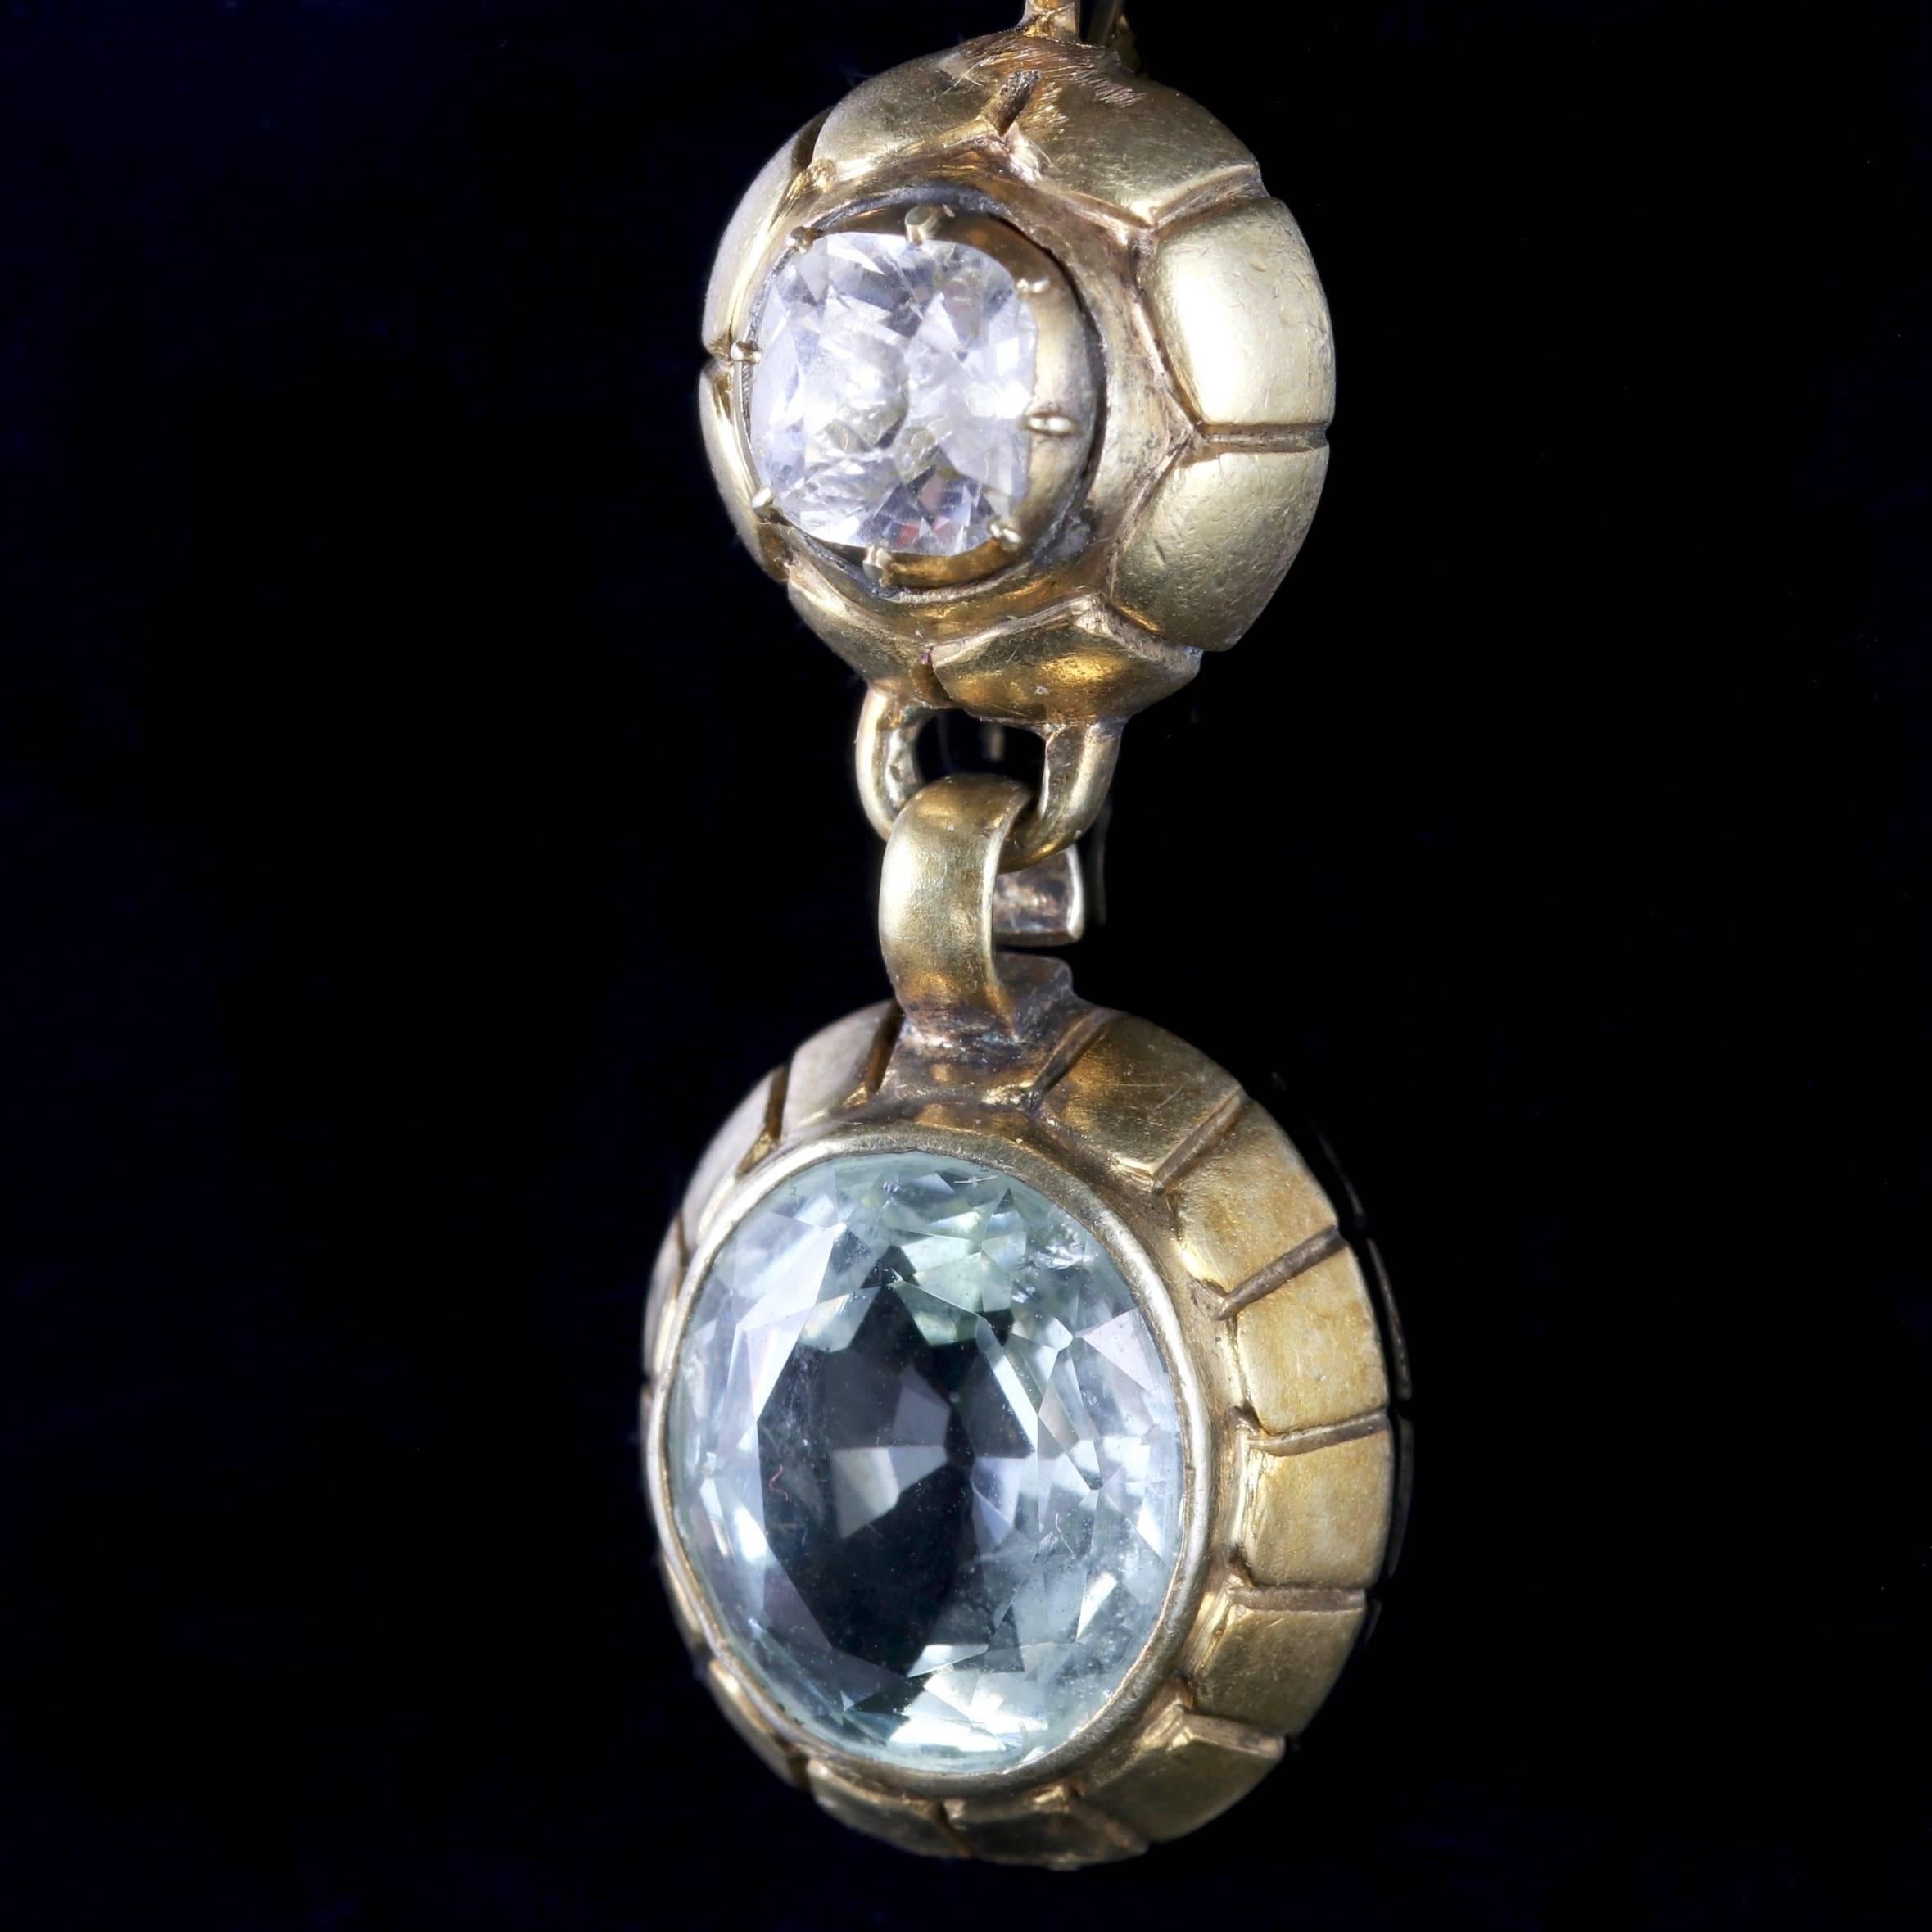 To read more please click continue reading below-

These fabulous antique Victorian 18ct Gold Aquamarine and White Sapphire drop earrings are Circa 1900.

Each earring is adorned with a large 3.80ct Aquamarine and accompanied by a 0.60ct sparkling